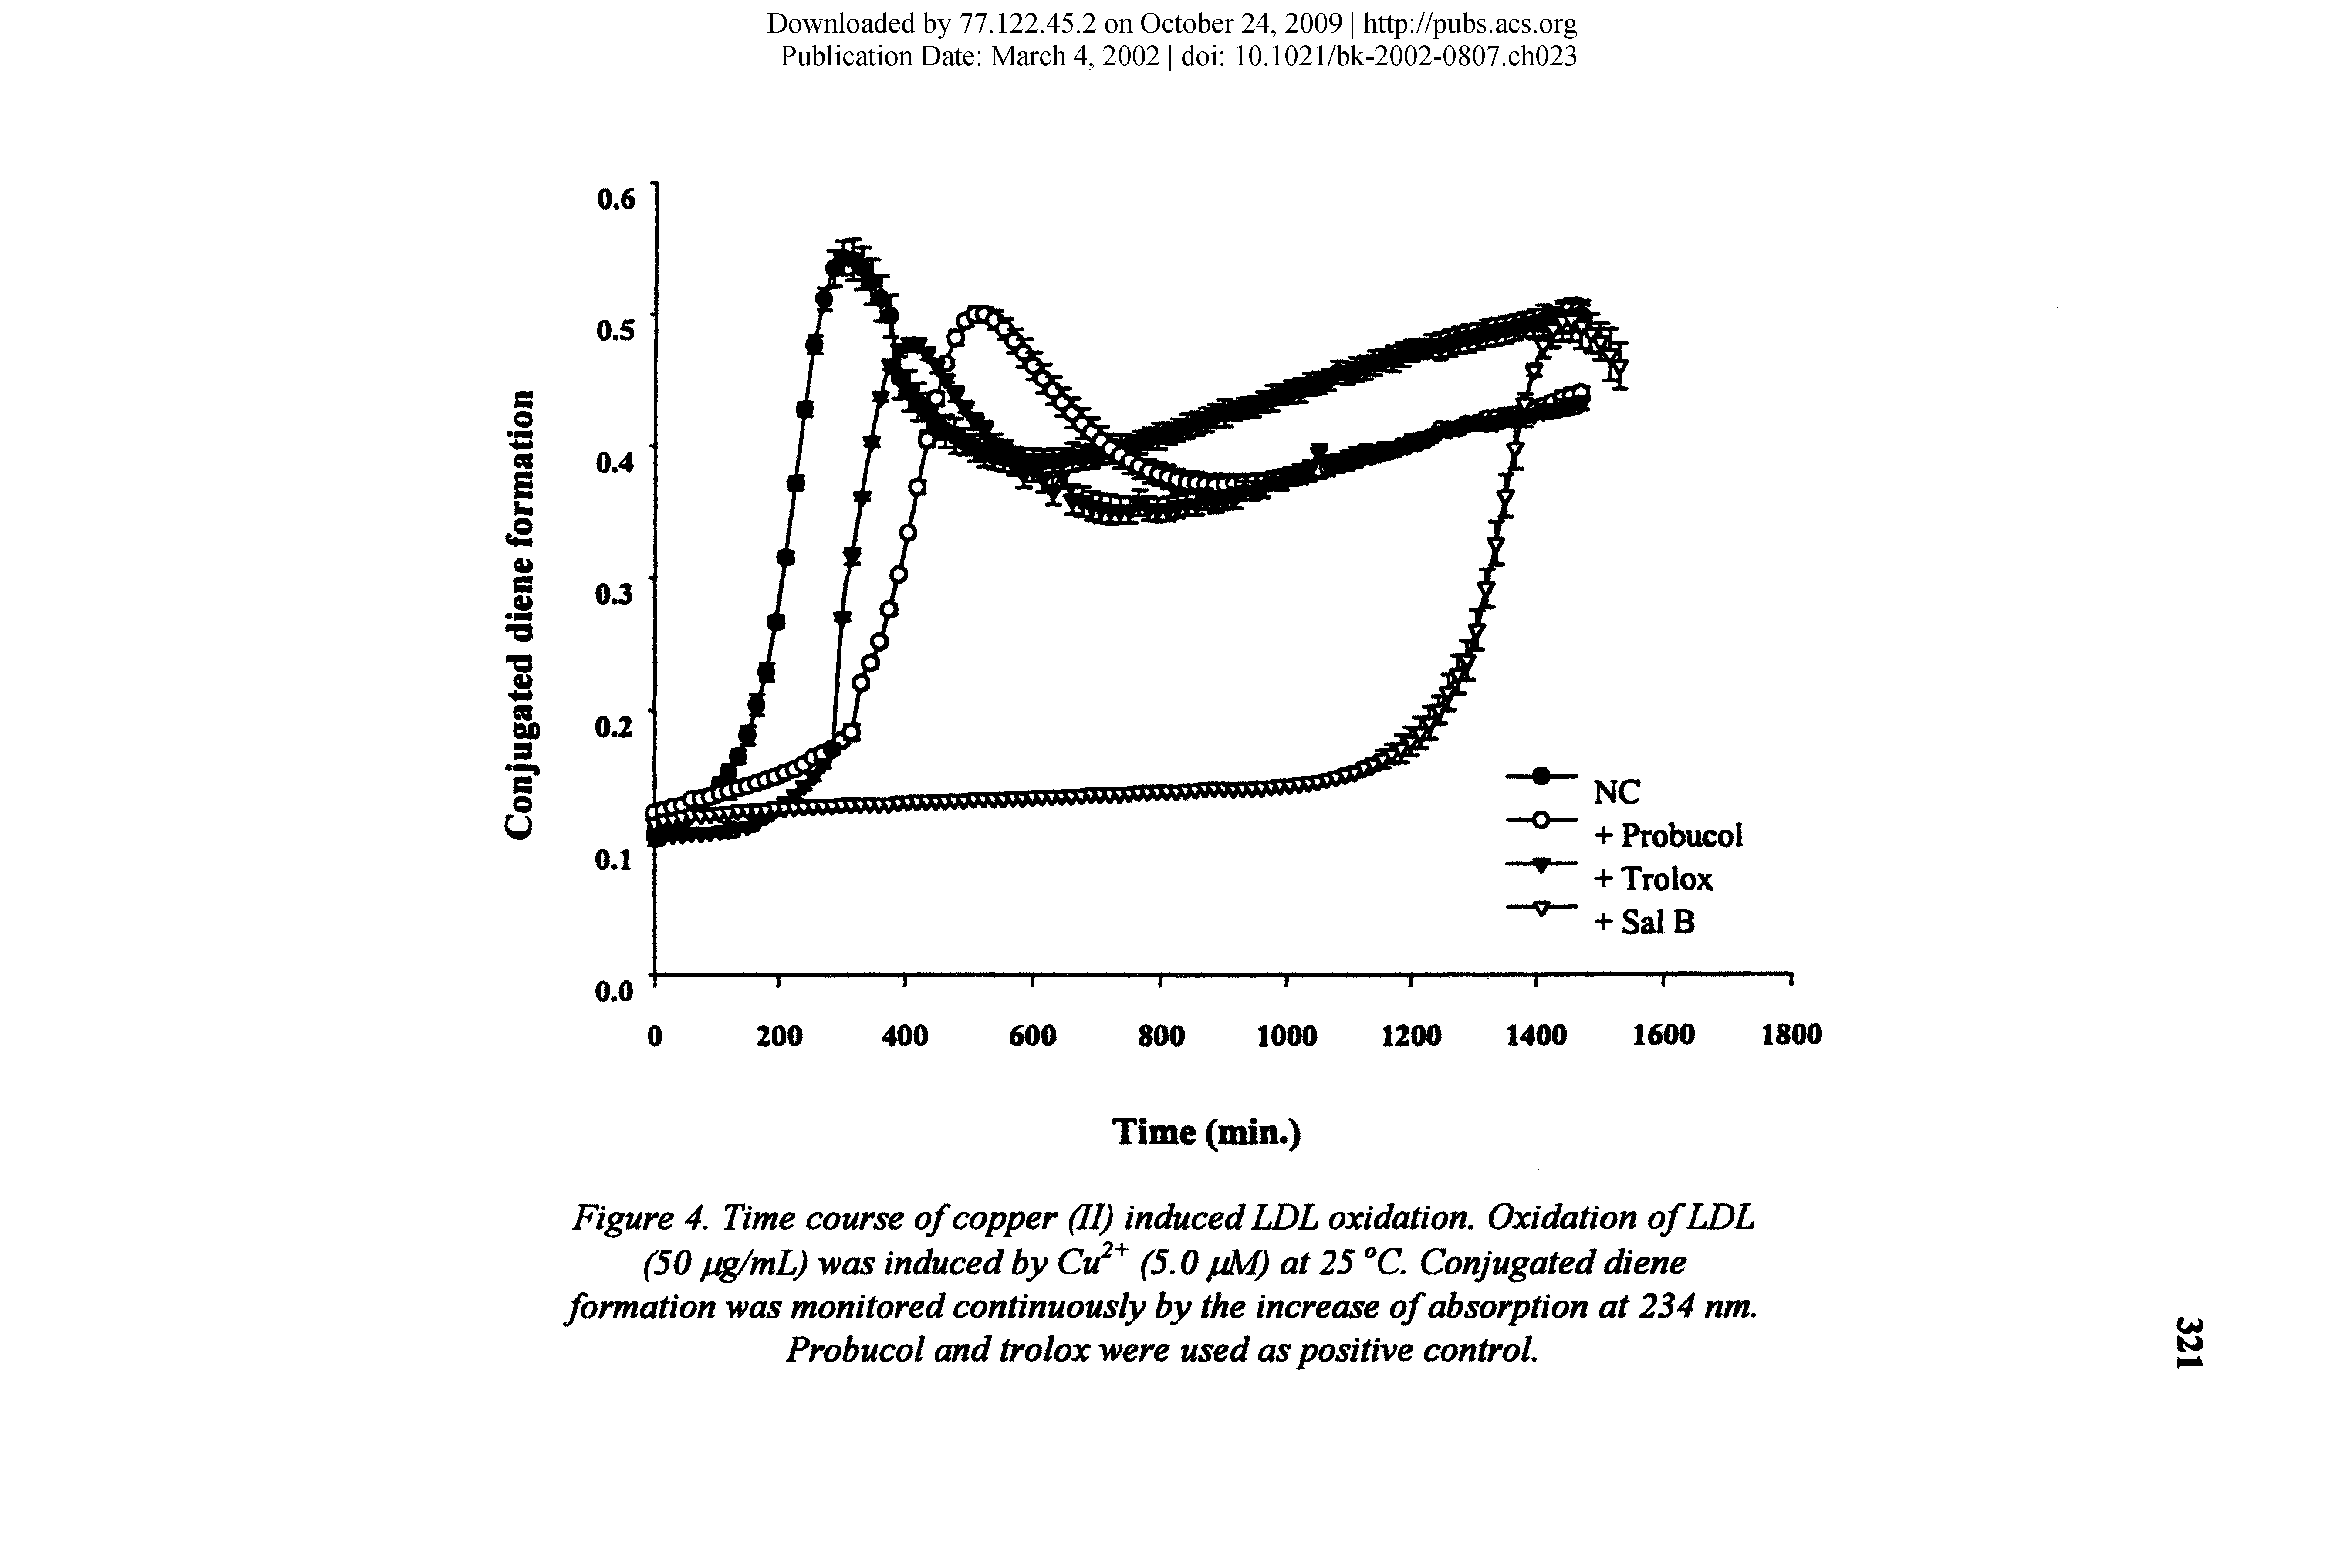 Figure 4, Time course of copper (II) induced LDL oxidation. Oxidation ofLDL (50 pg/mL) was induced by Cu (5.0 pM) at 25 C. Conjugated diene formation was monitored continuously by the increase of absorption at 234 nm. Probucol and trolox were used as positive control...